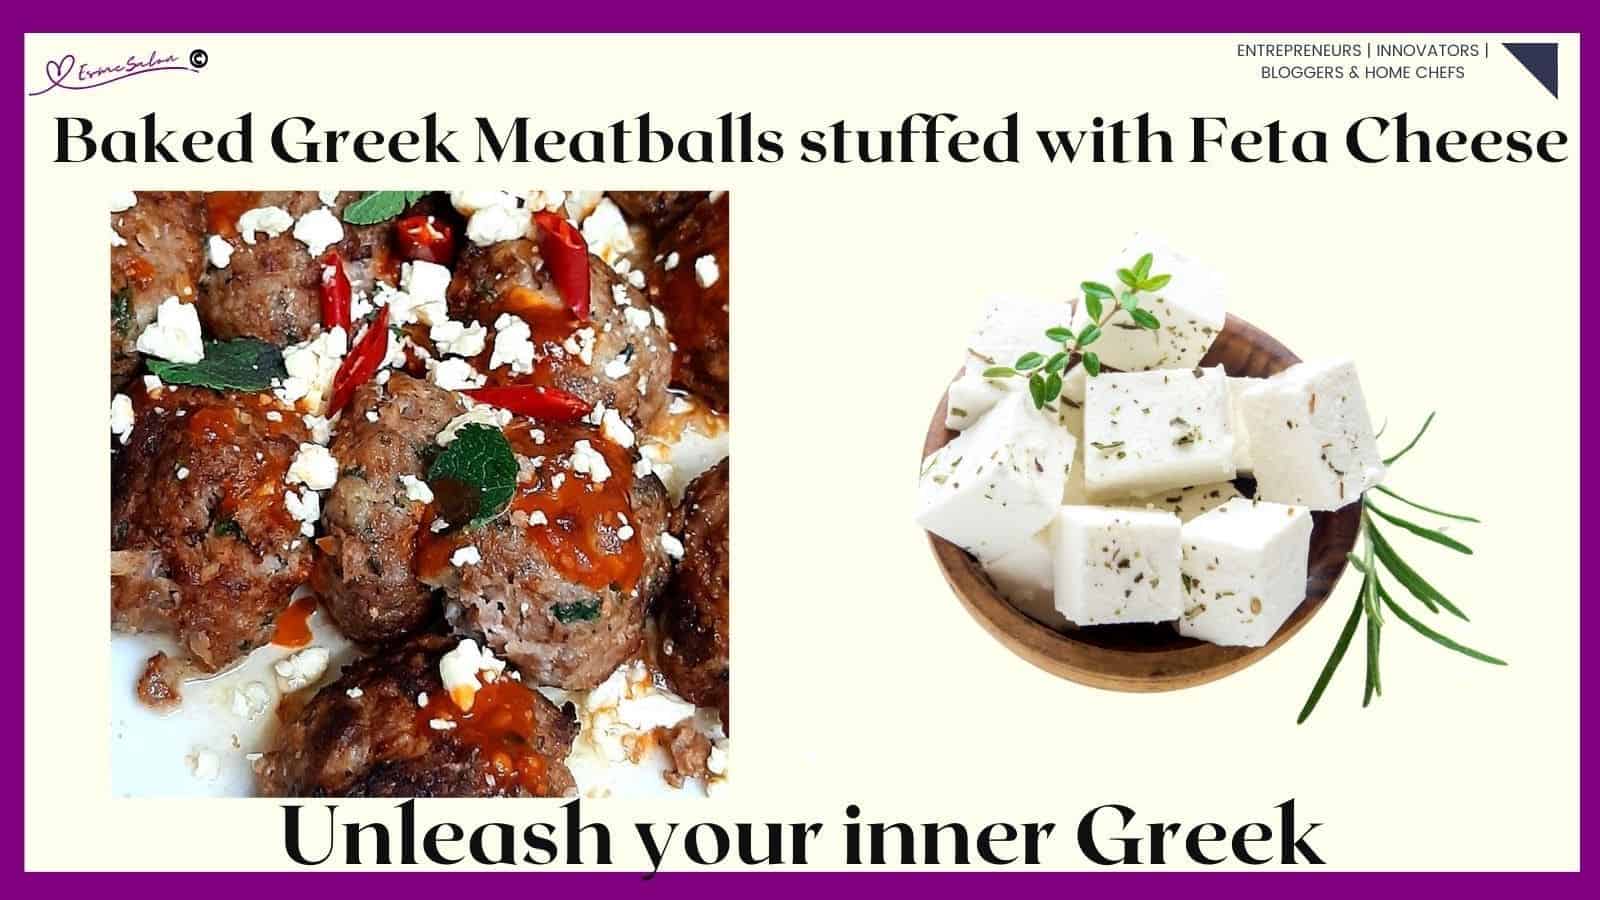 an image of a plate filled with Baked Greek Meatballs Stuffed with Feta Cheese